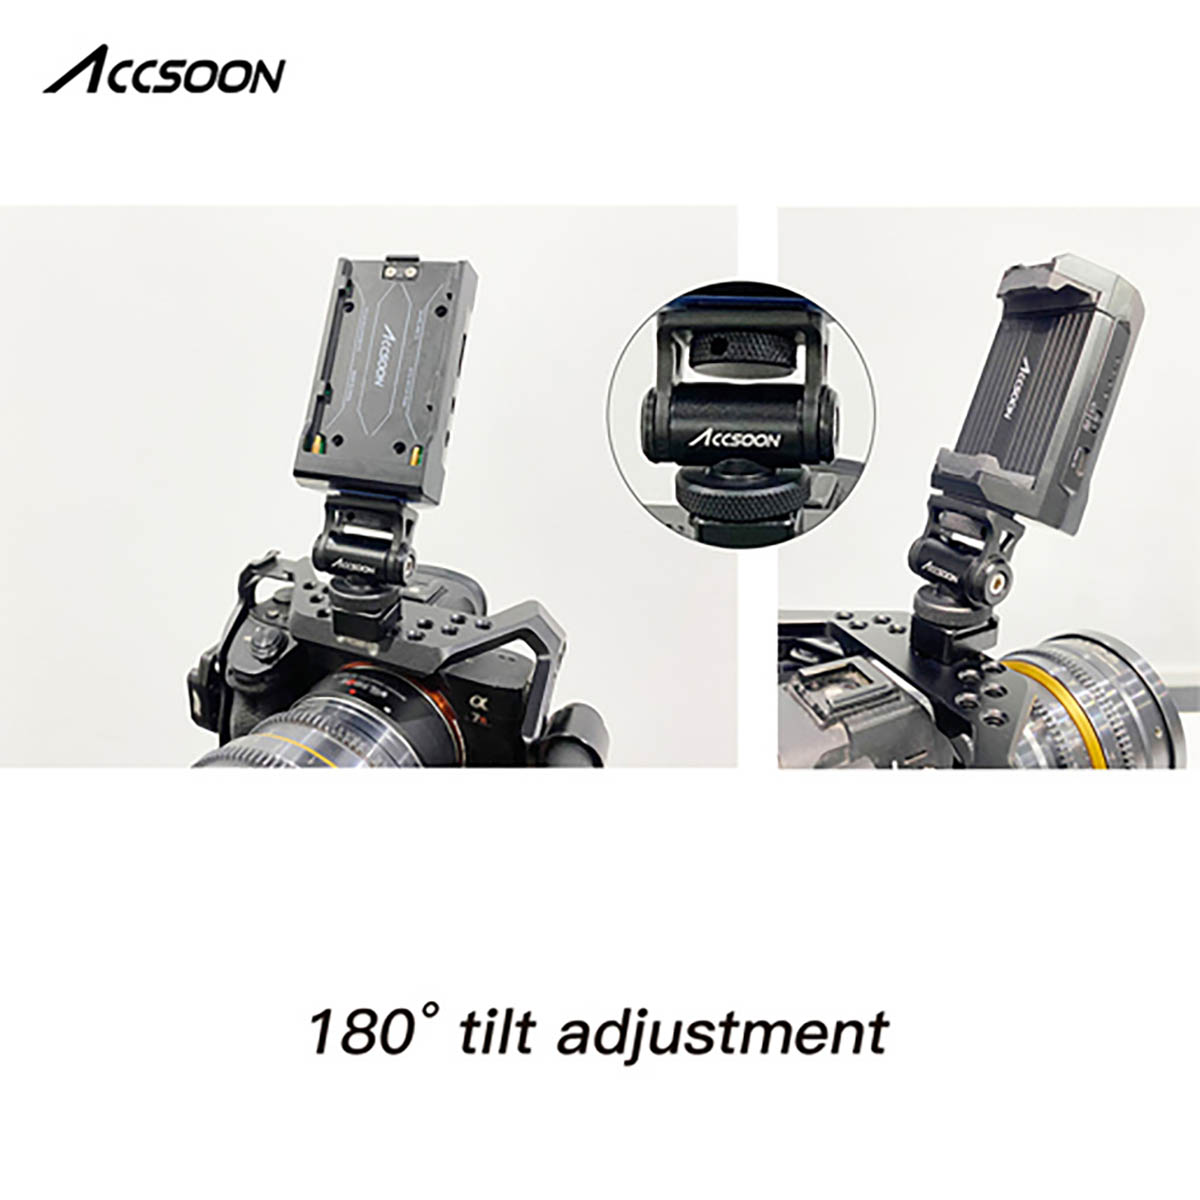 Accsoon Cold Shoe Adapter AA-01